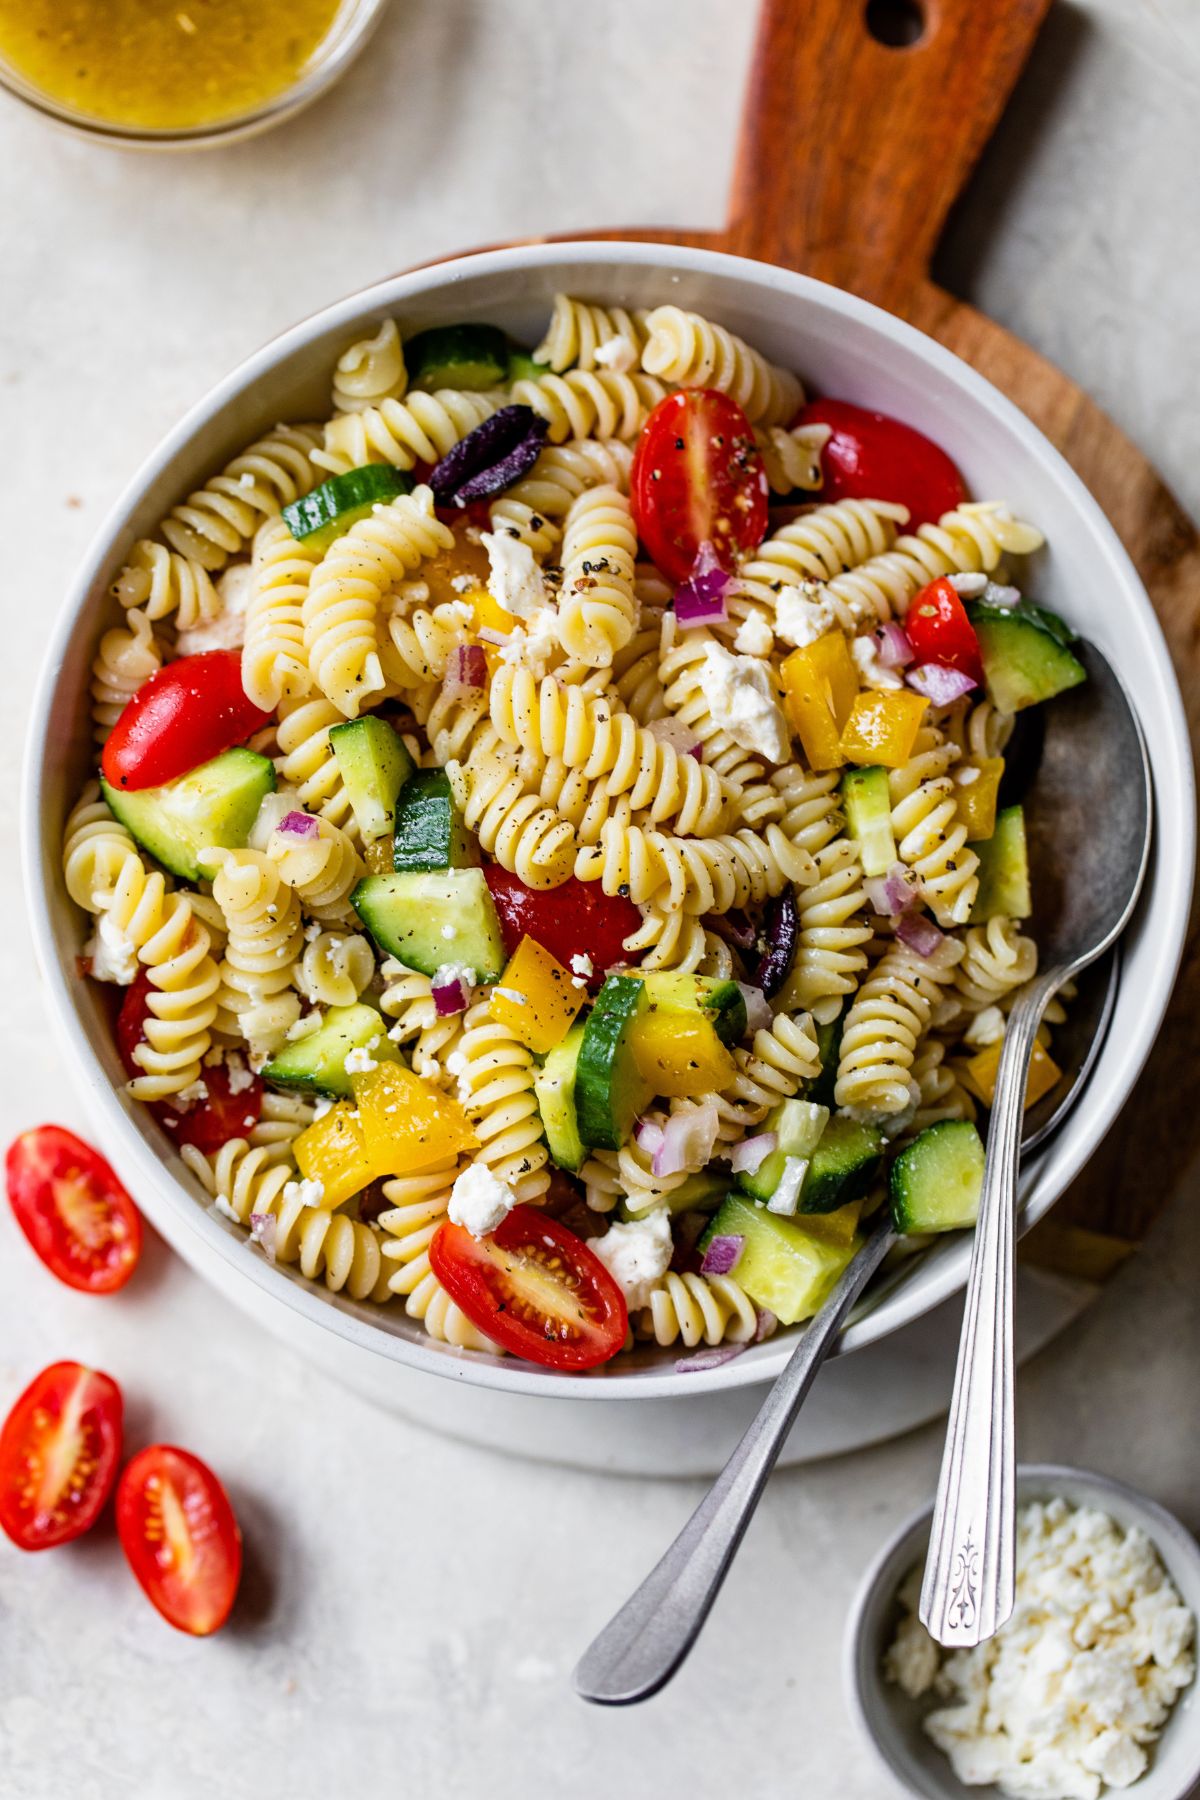 Healthy and Light Side Dishes - Cold Pasta Salads